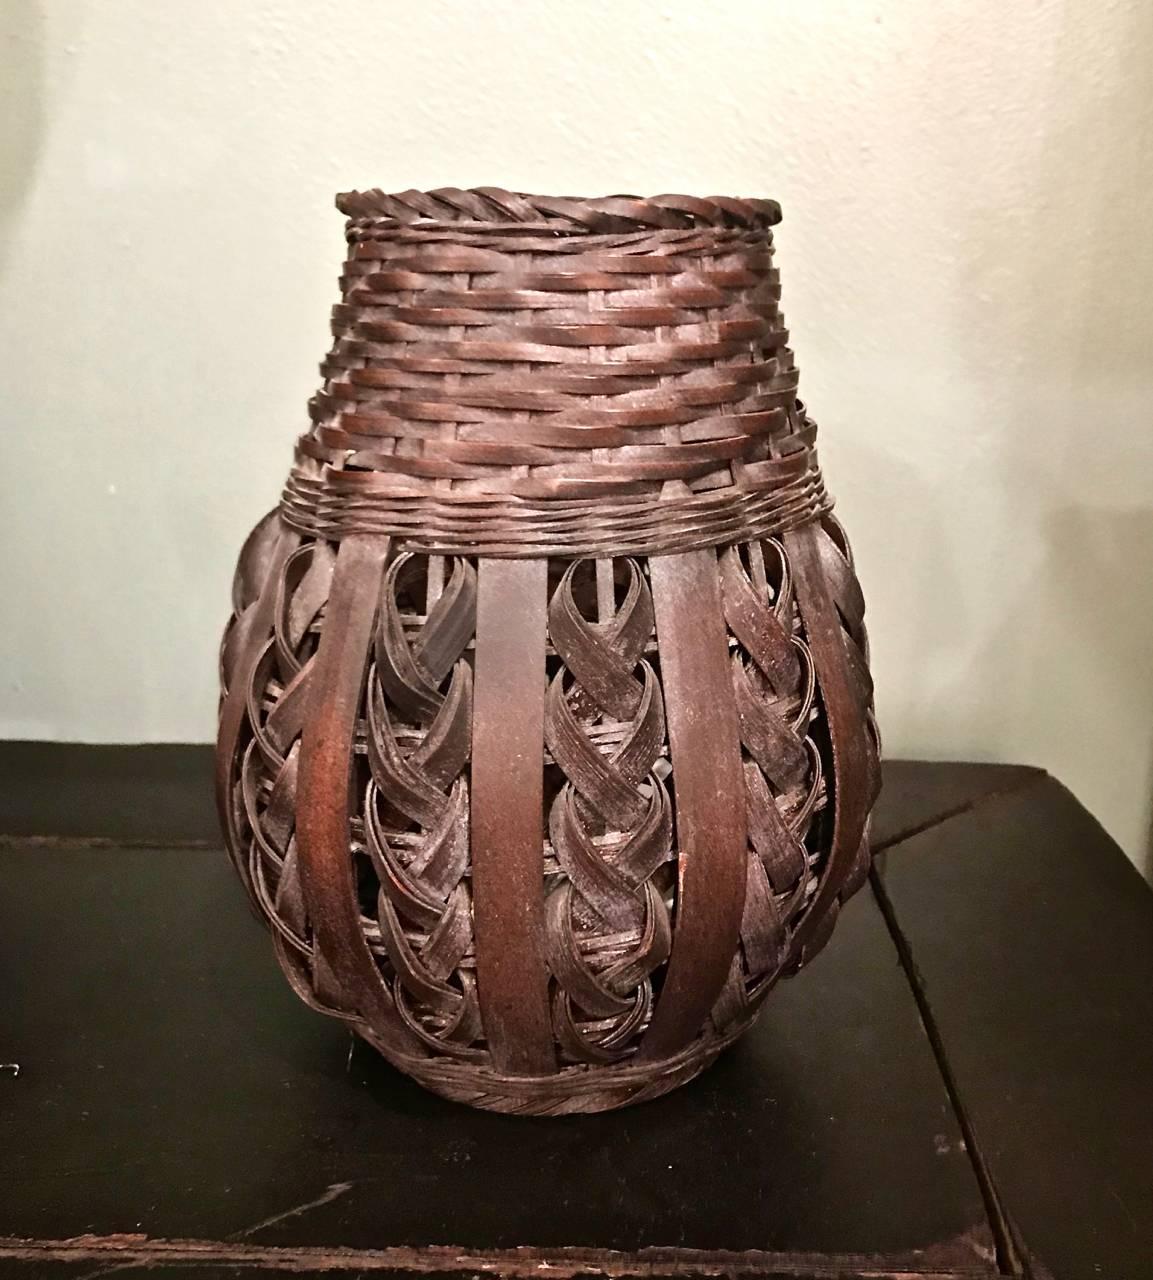 Charming Ikebana woven bamboo basket that dates to the first half of the 20th century. The basket is in overall good condition and includes a liner, which is a replacement.